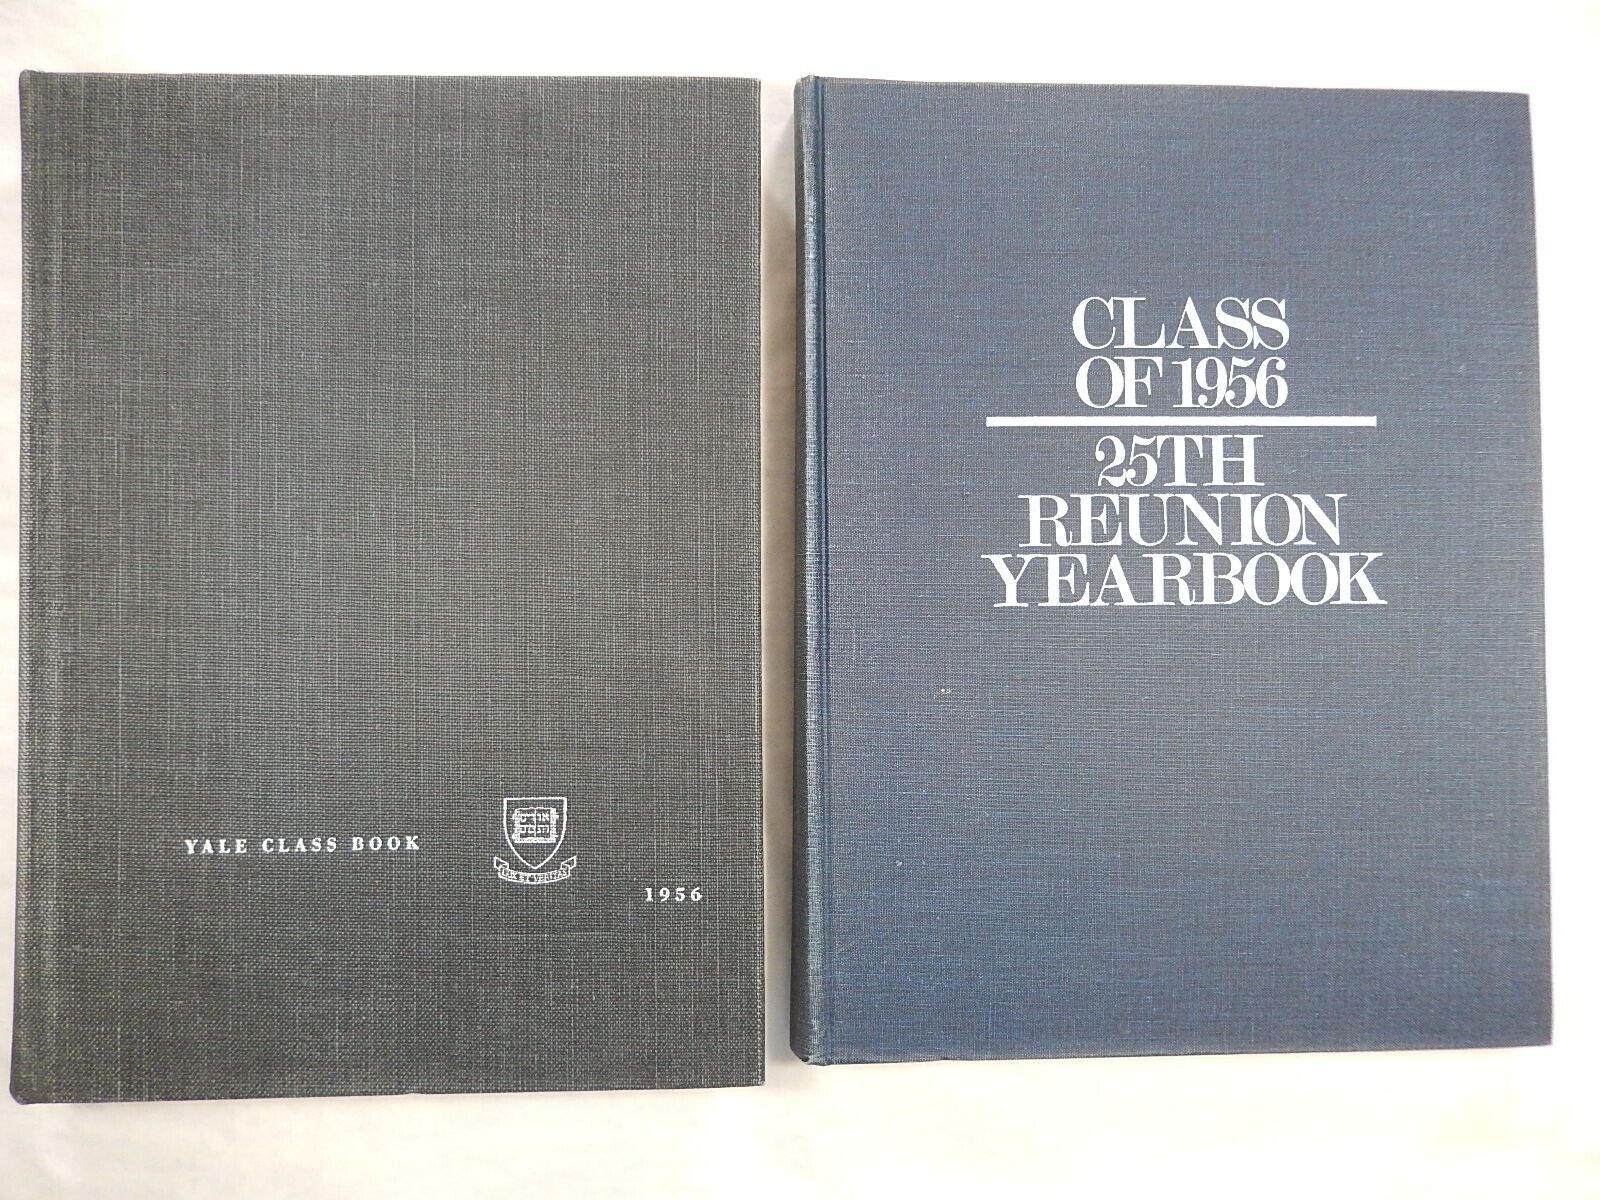 Yearbook, Yale University, 1956, + 25th Reunion Yearbook, Both Very Good